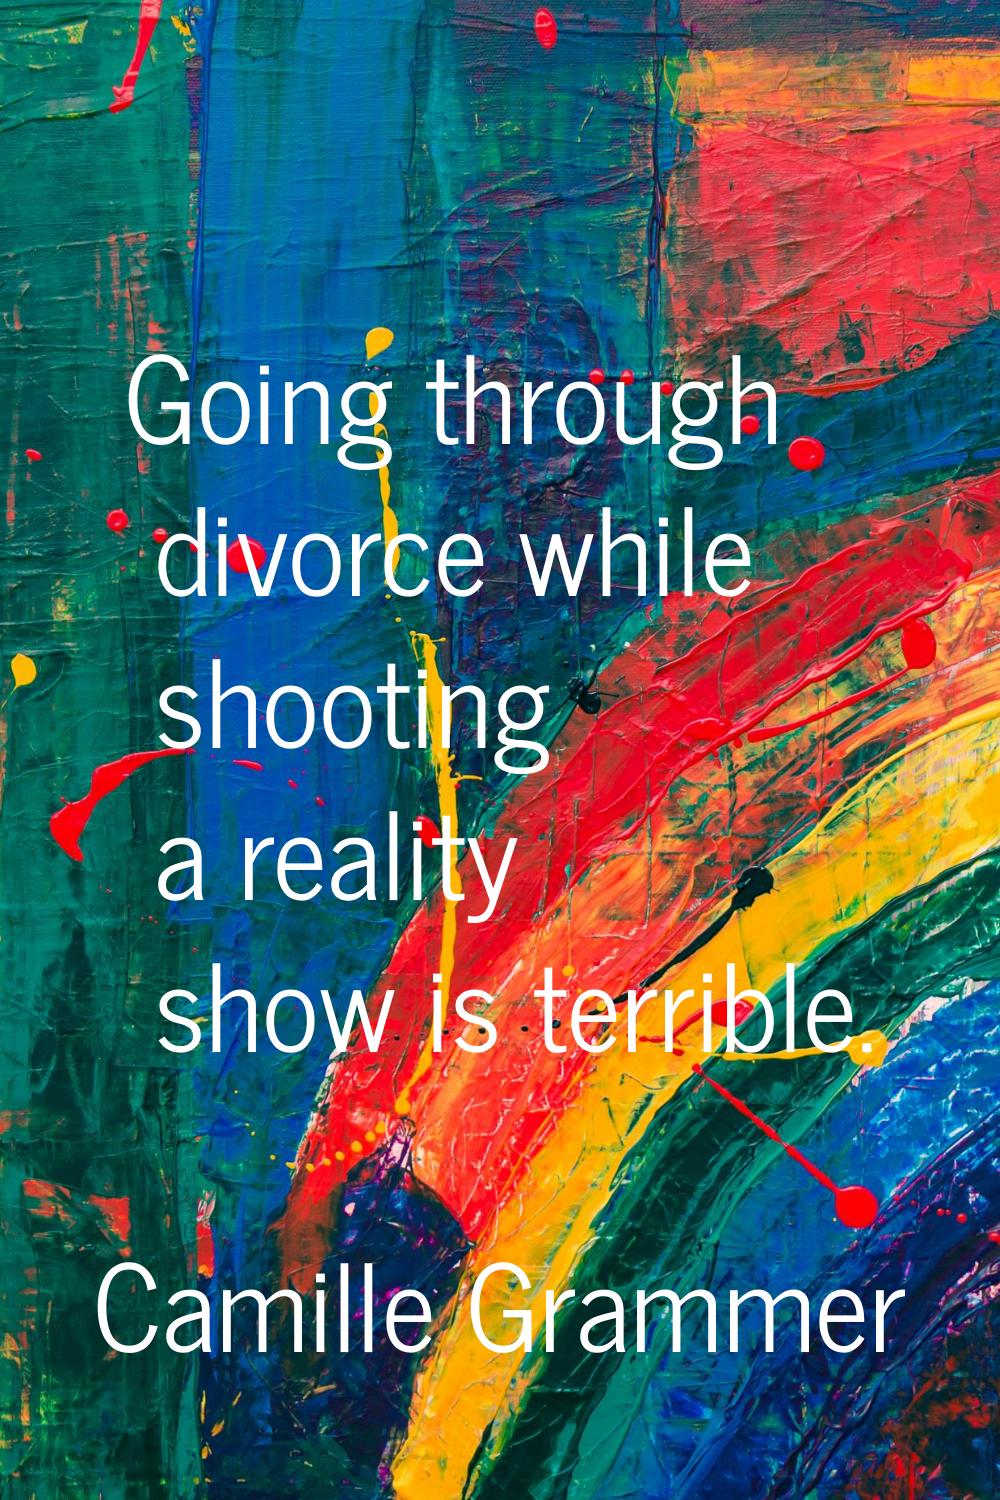 Going through divorce while shooting a reality show is terrible.